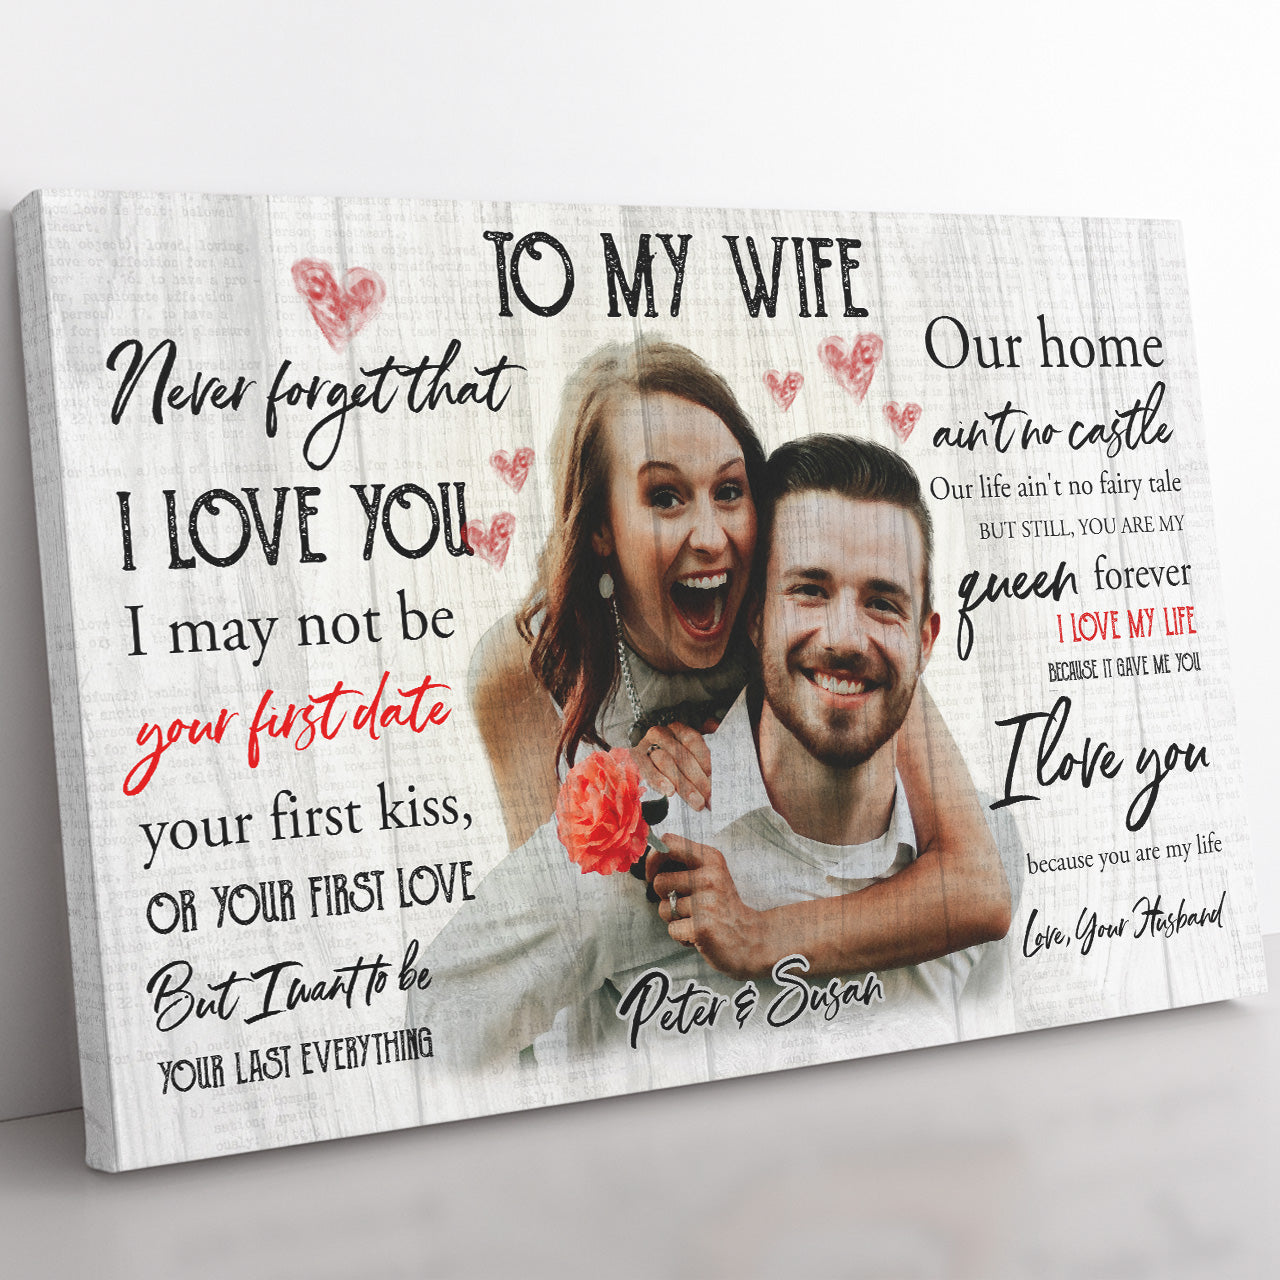 Personalized Canvas Gift Ideas to My Wife, I Am Your Last 20121805